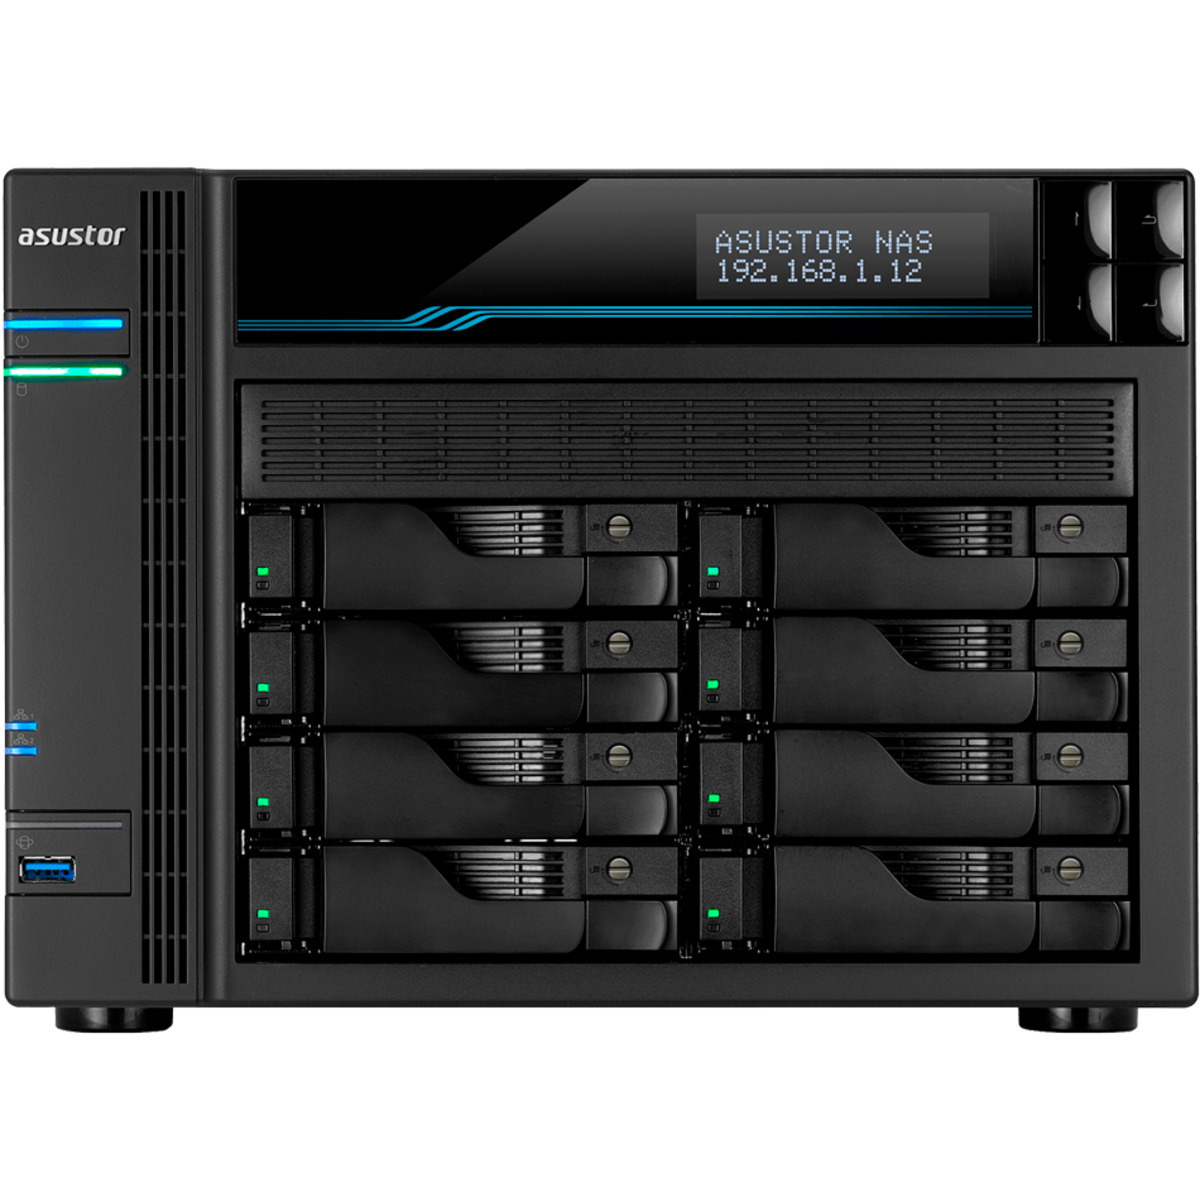 ASUSTOR AS6508T Lockerstor 8 16tb 8-Bay Desktop Multimedia / Power User / Business NAS - Network Attached Storage Device 8x2tb Seagate IronWolf Pro ST2000NT001 3.5 7200rpm SATA 6Gb/s HDD NAS Class Drives Installed - Burn-In Tested - ON SALE - FREE RAM UPGRADE AS6508T Lockerstor 8